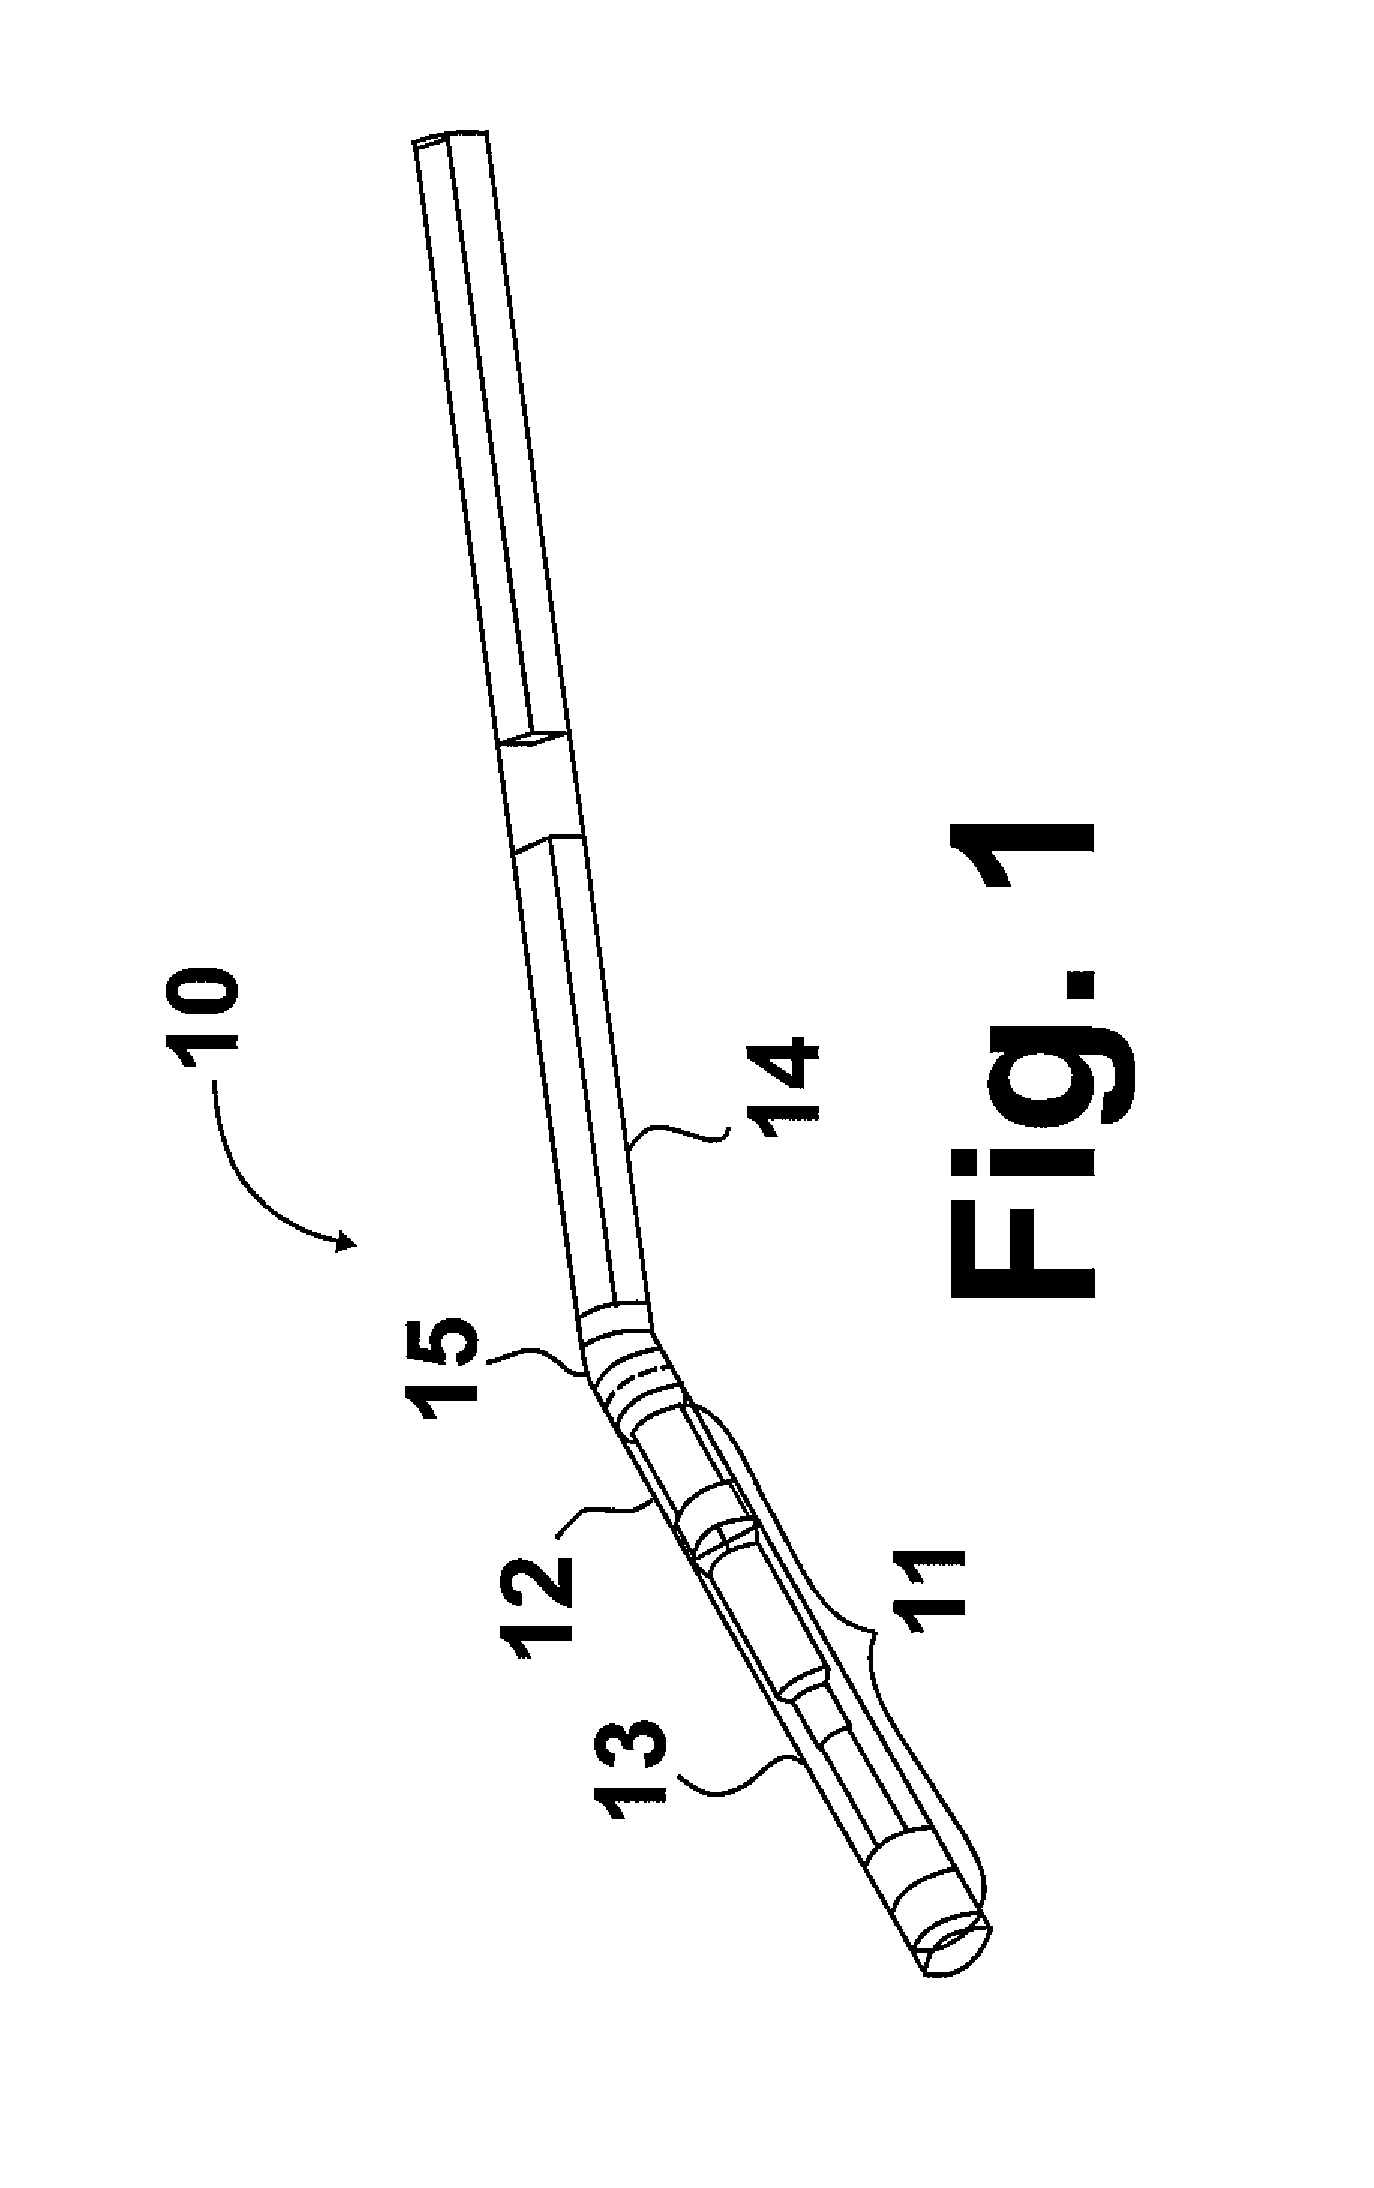 X-ray backscatter device for wellbore casing and pipeline inspection